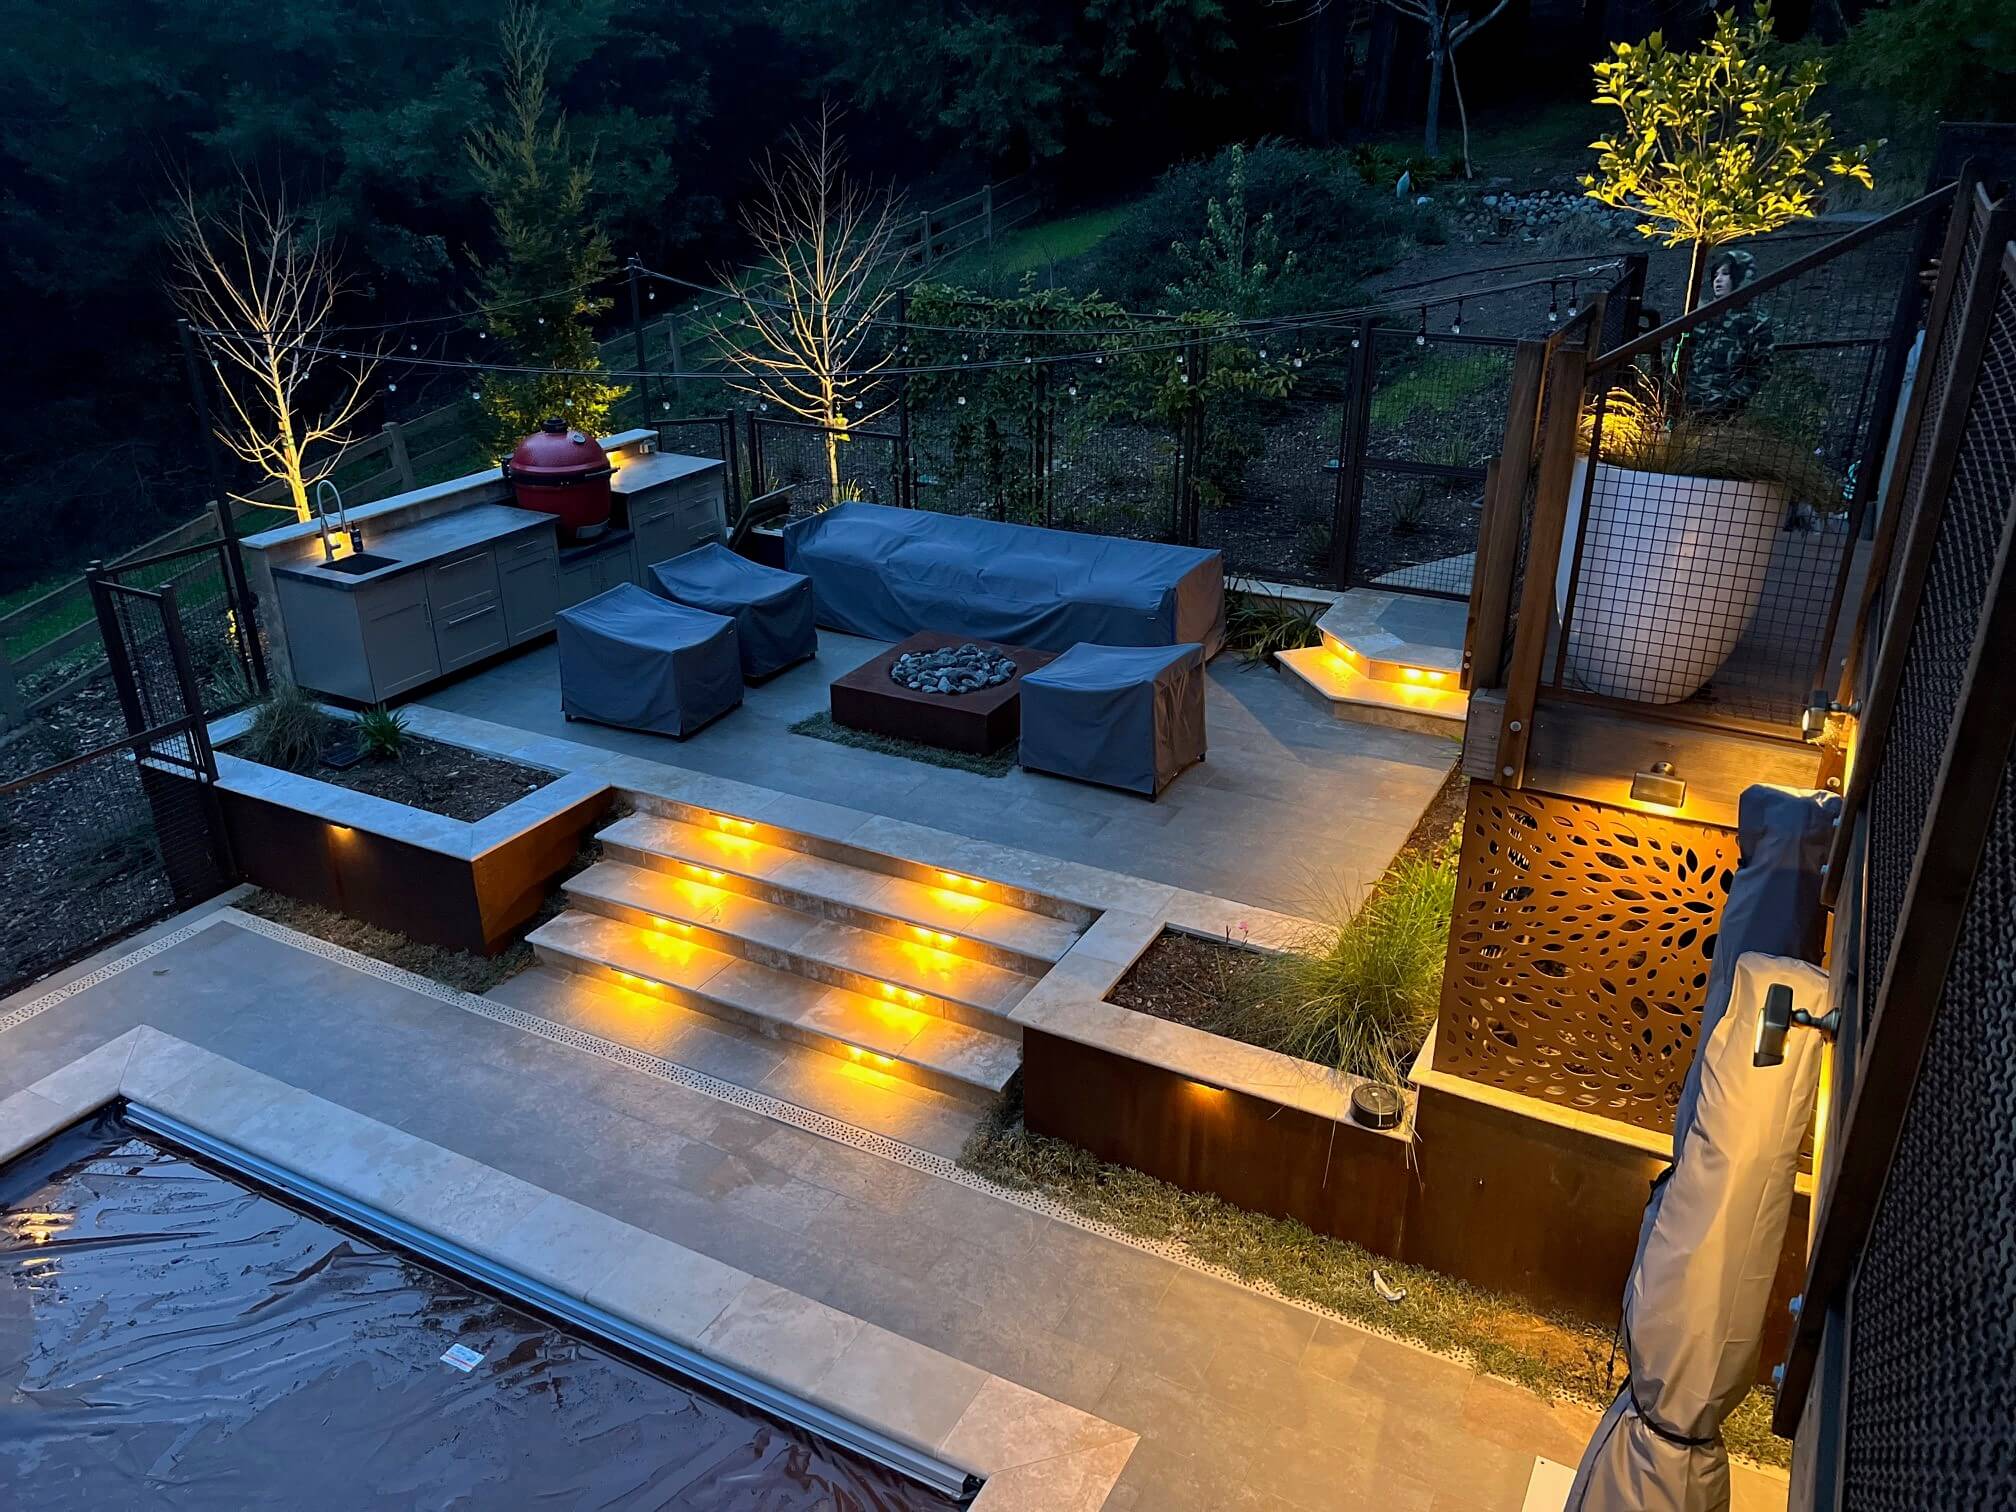 Nightime view of a firepit seating area on a raised patio terrace of a sloped backyard